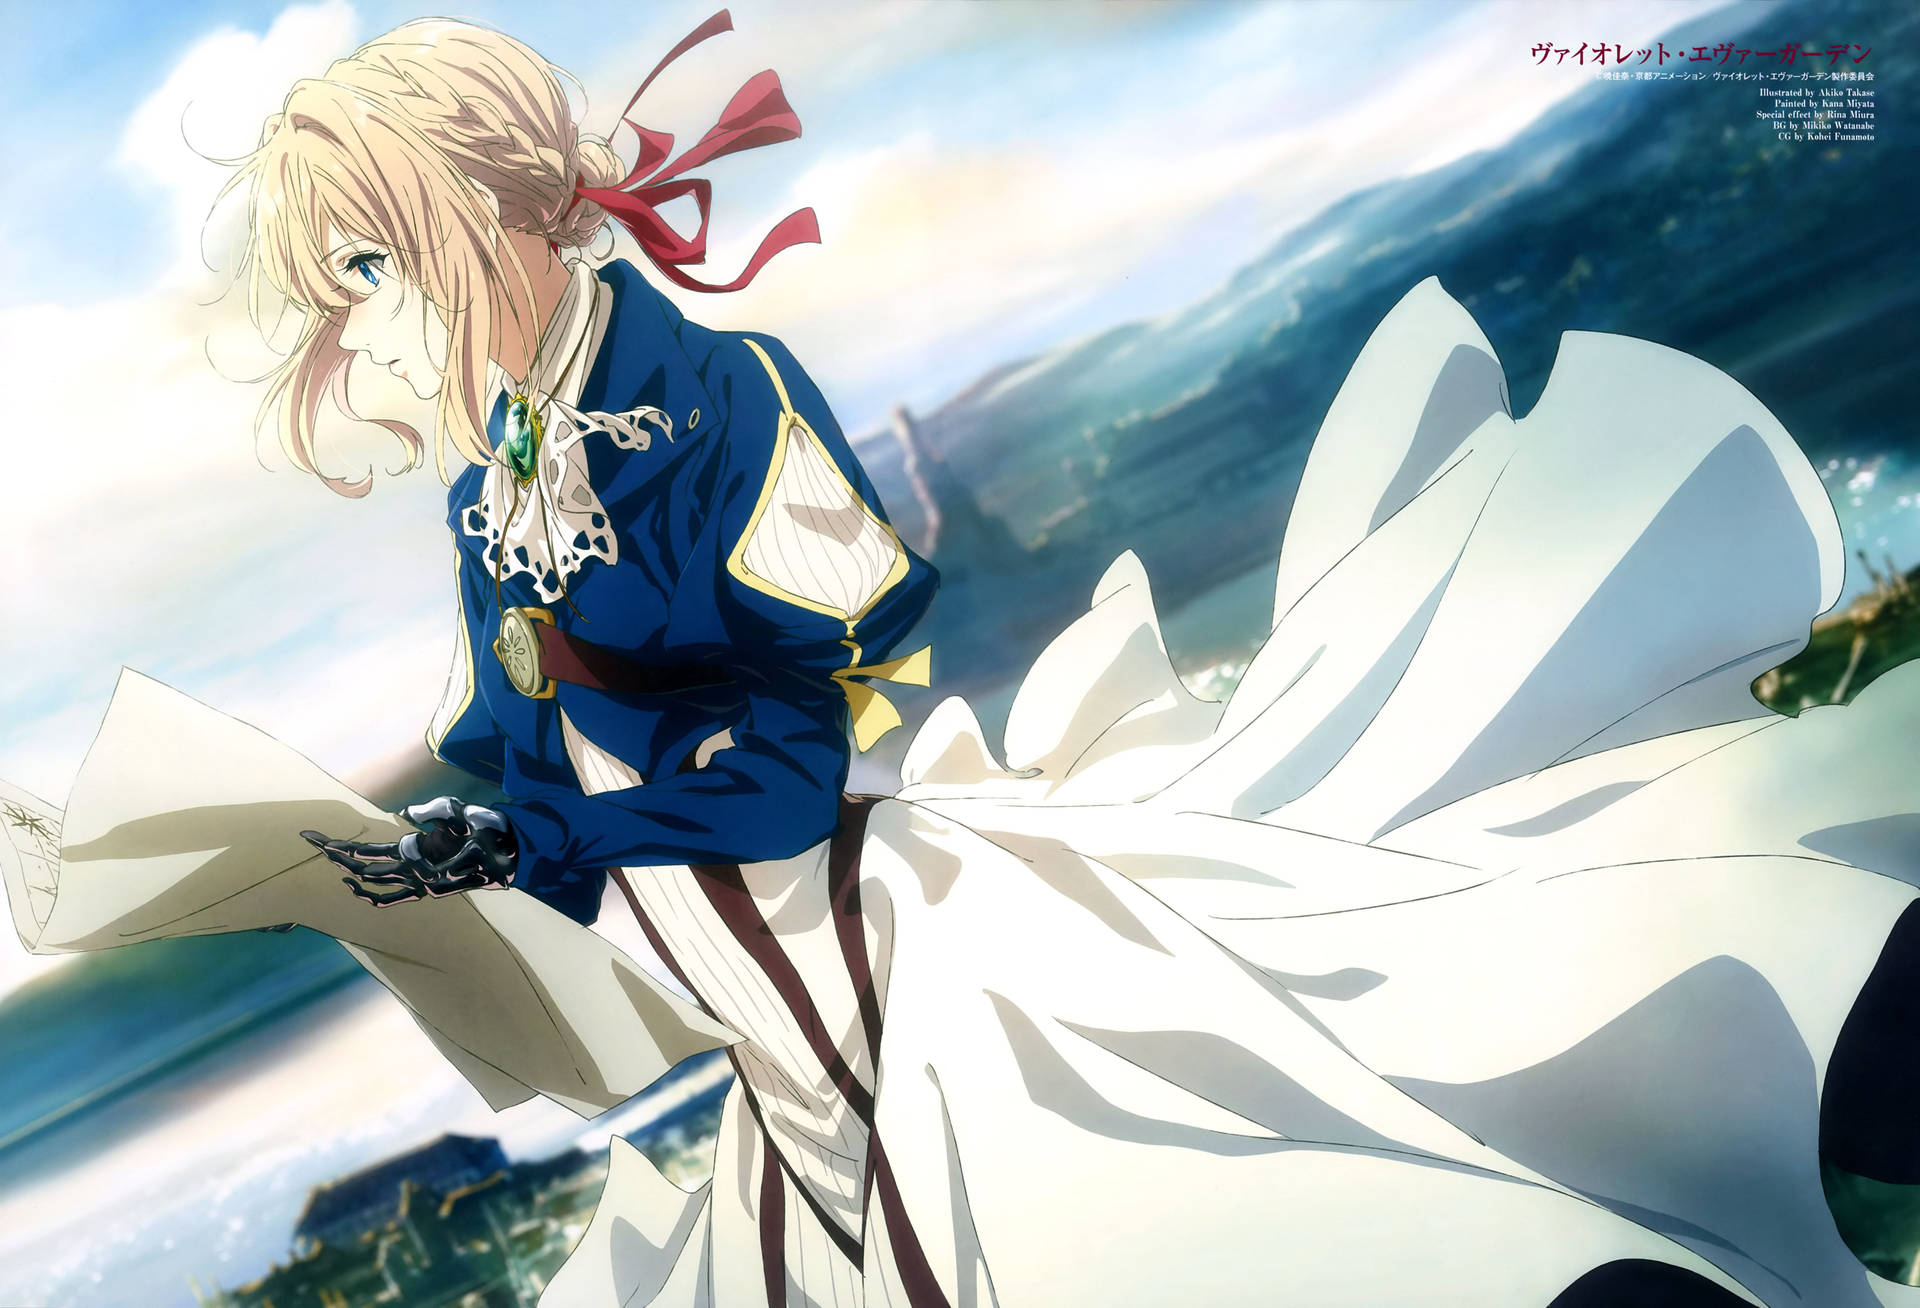 Top 999+ Violet Evergarden Wallpaper Full HD, 4K✅Free to Use